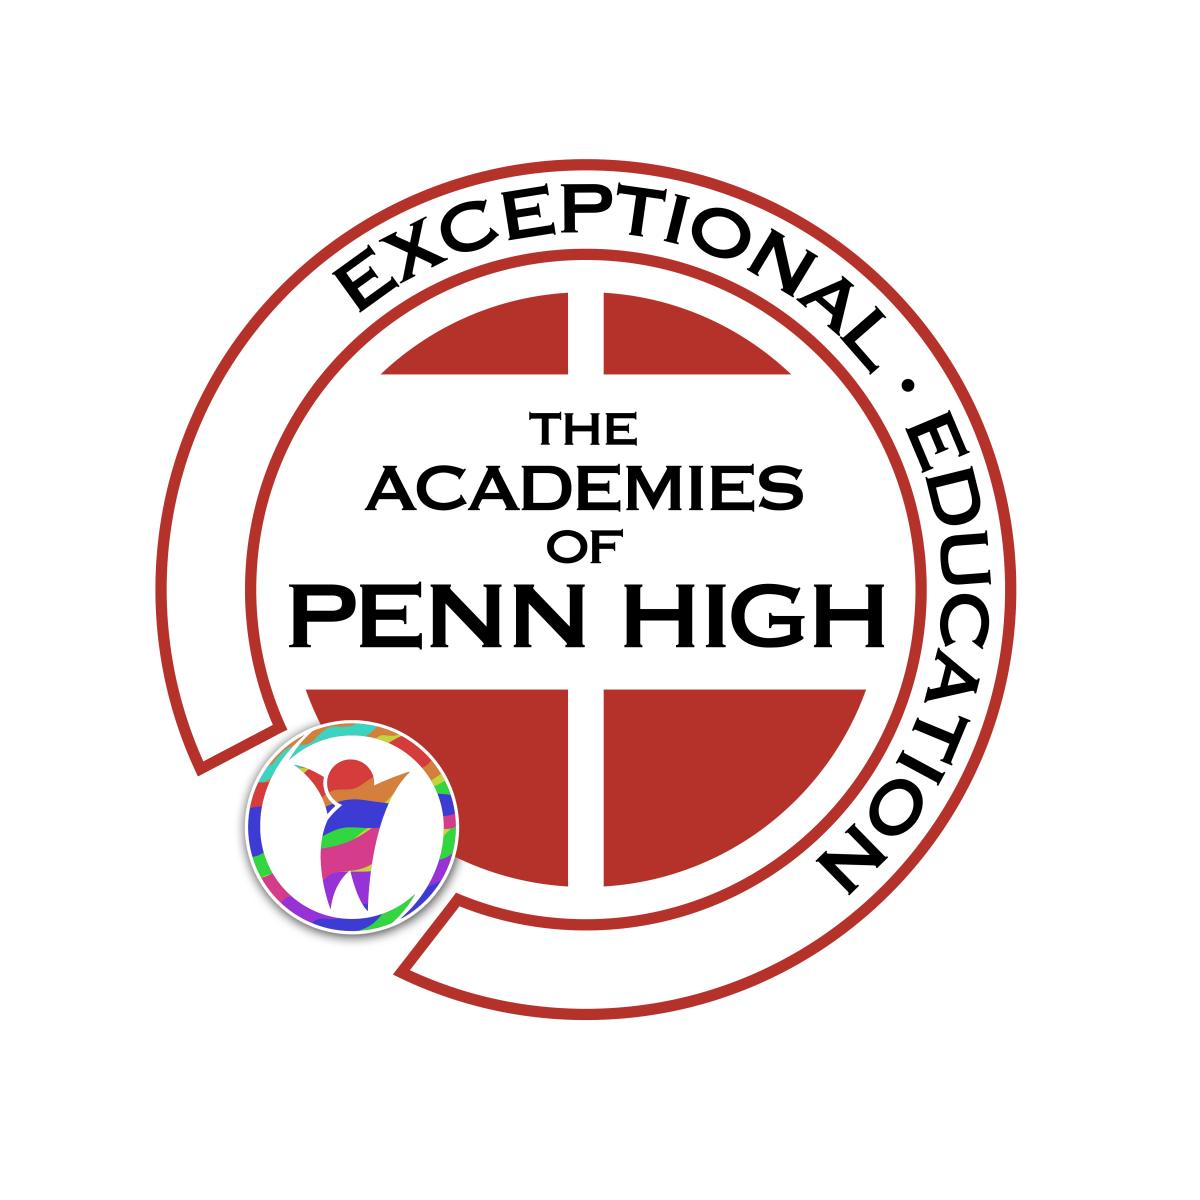 Exceptional Education logo.